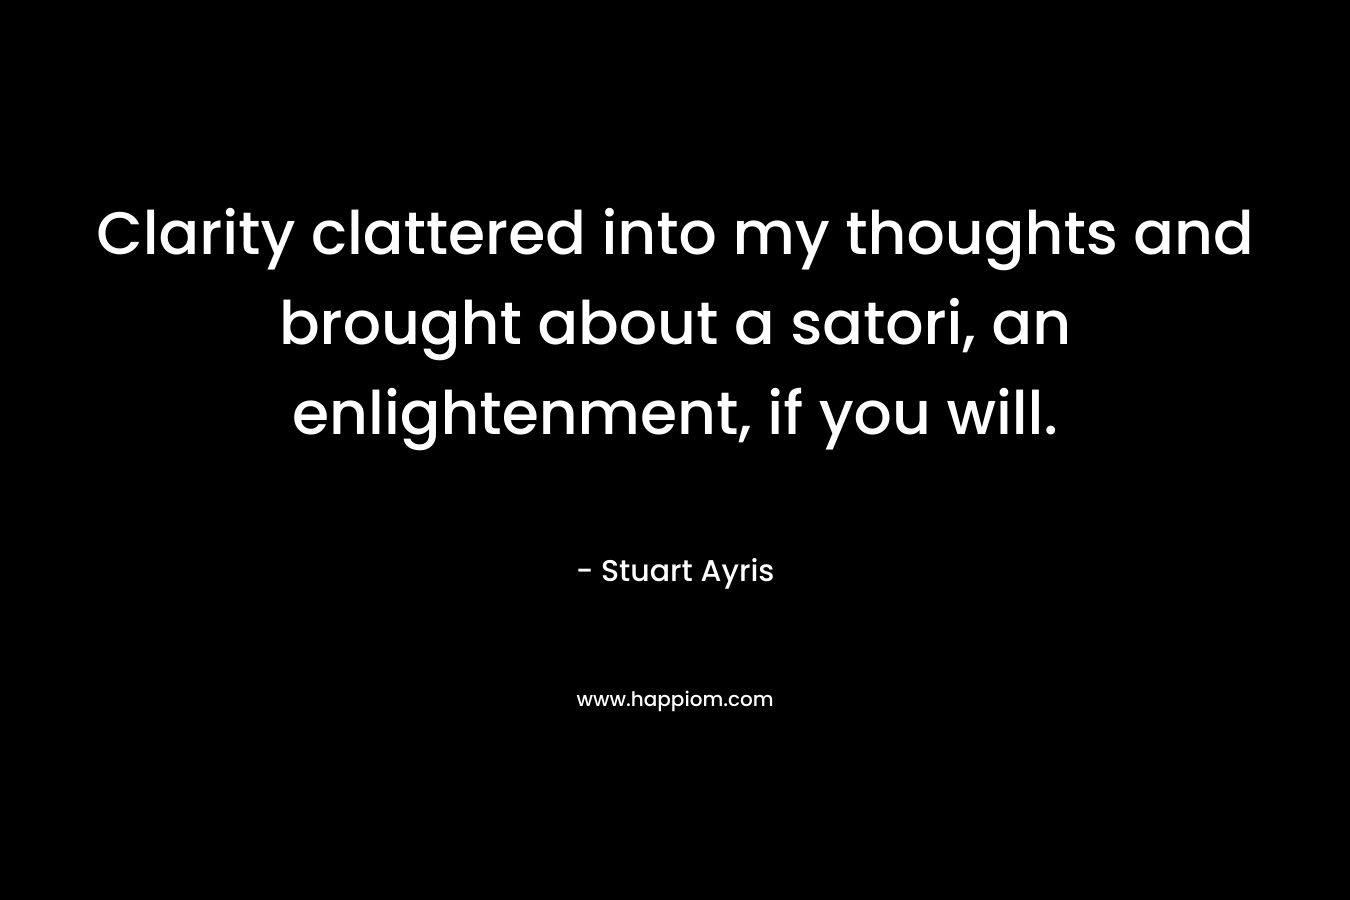 Clarity clattered into my thoughts and brought about a satori, an enlightenment, if you will.